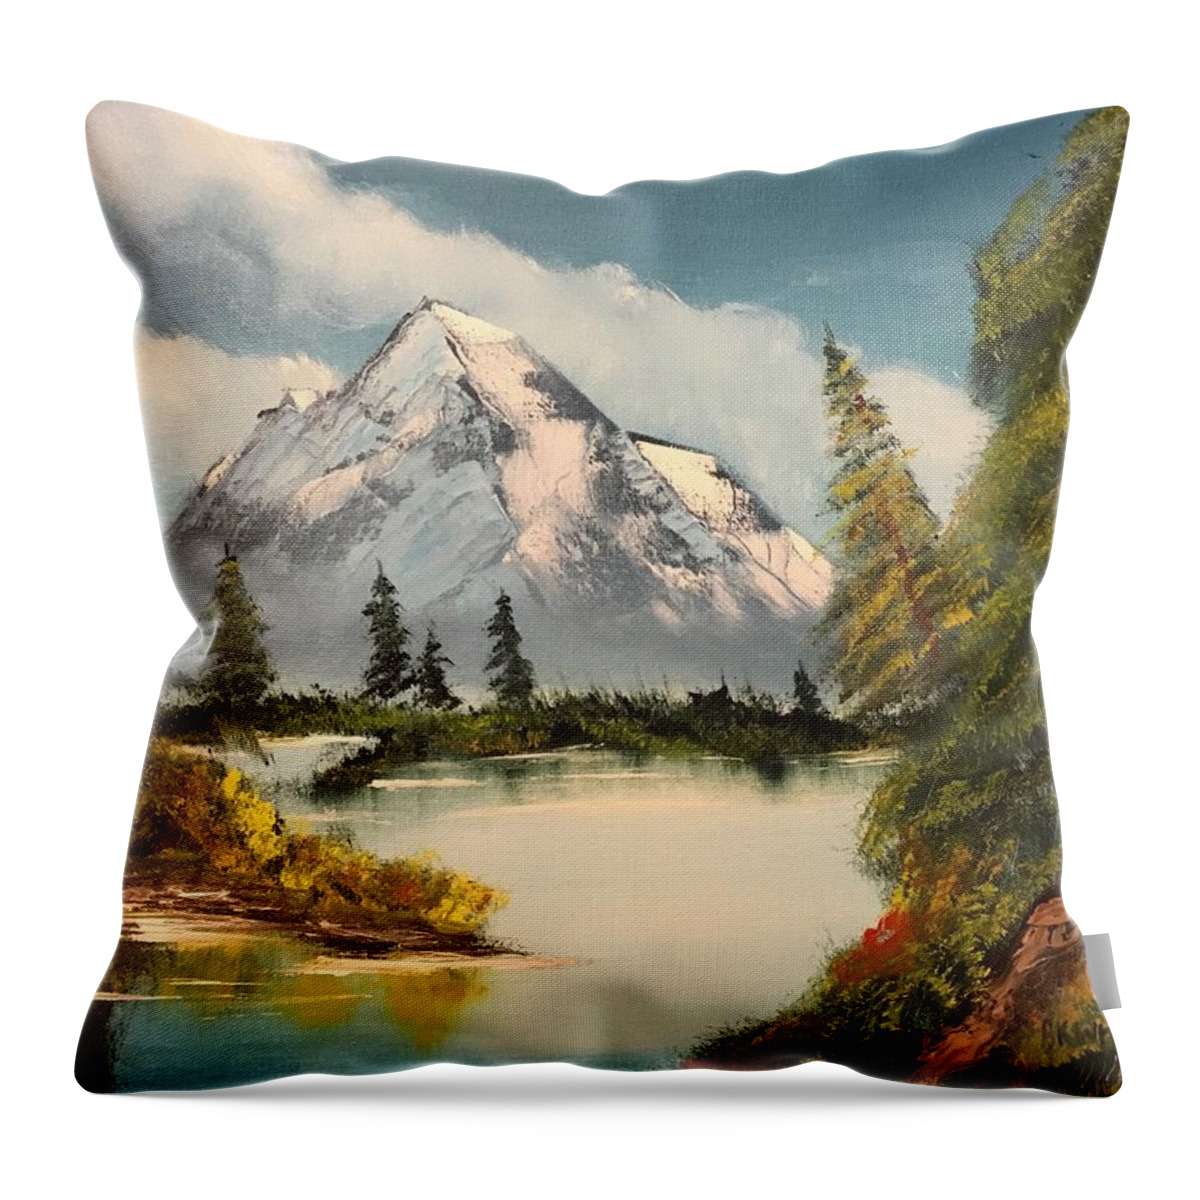 Mountain Throw Pillow featuring the painting Mountain View by Brian White